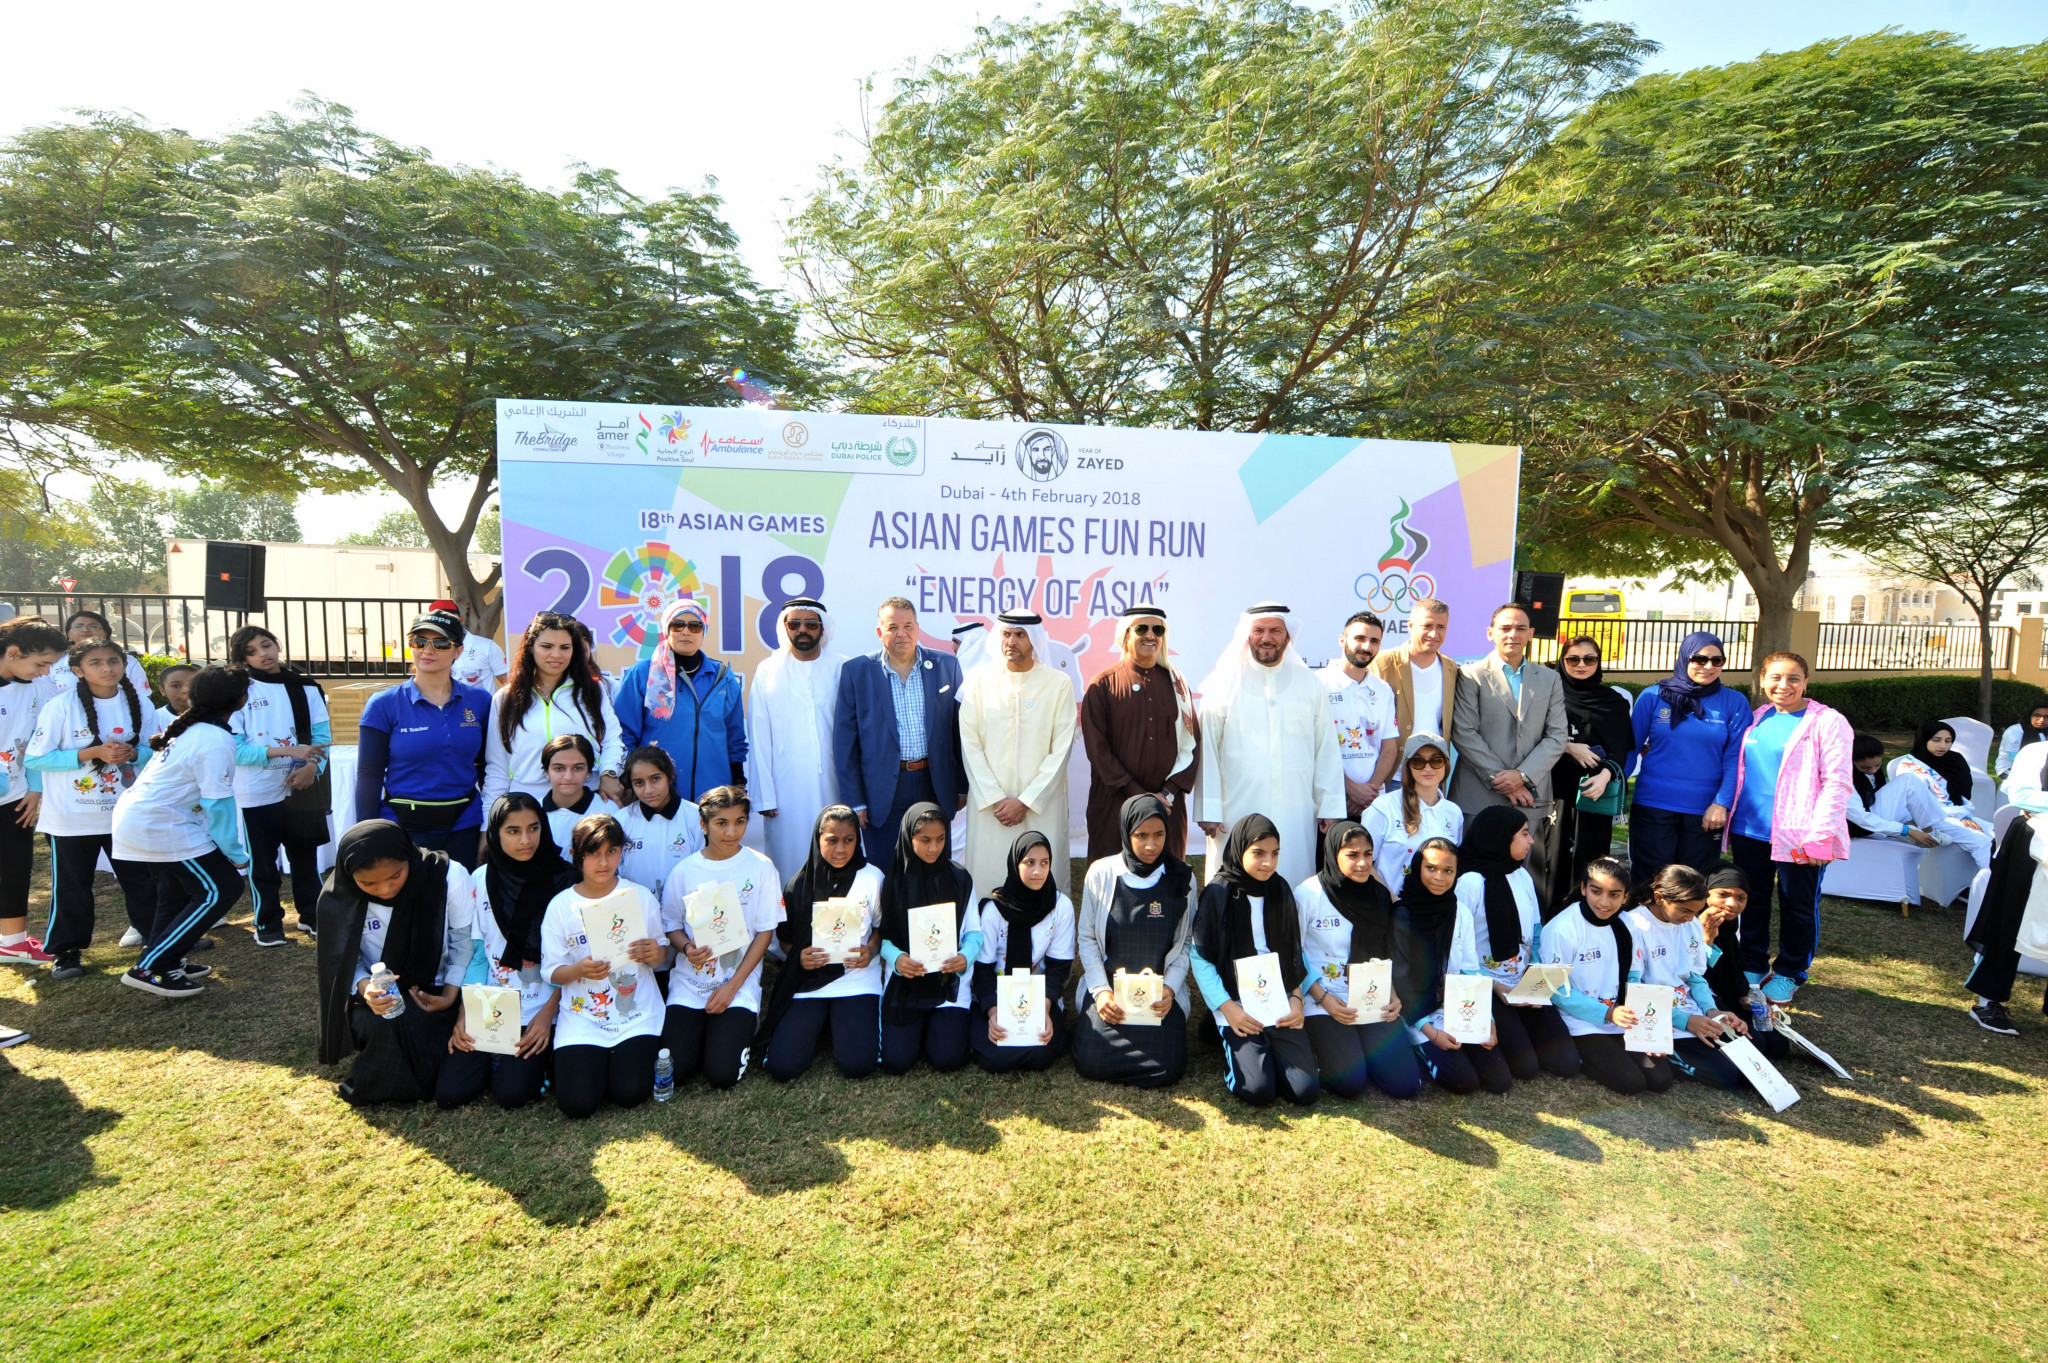 The top 30 finishers were given certificates ©UAE NOC